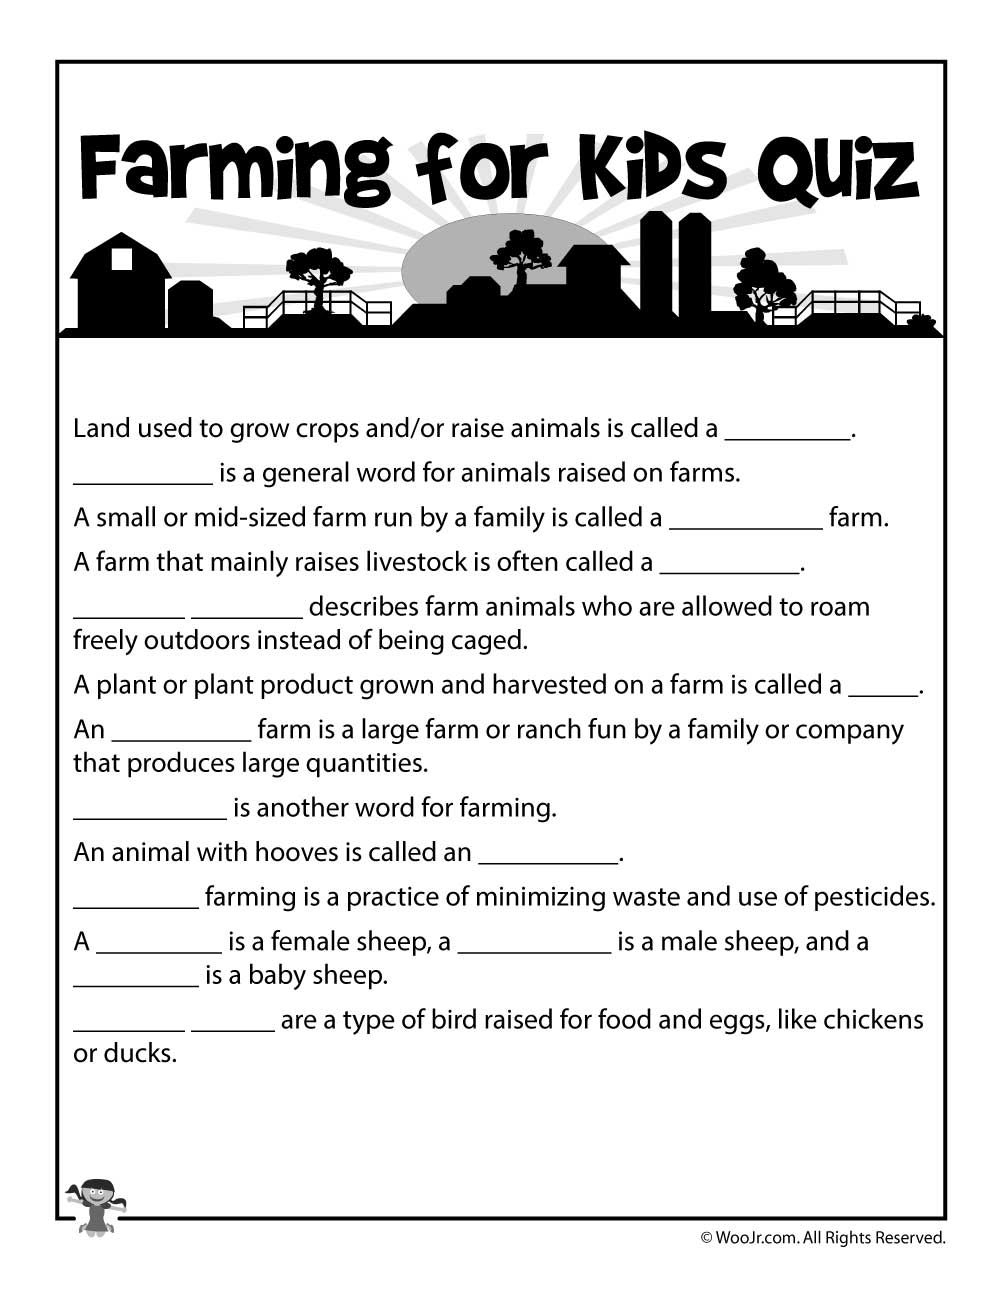 Learn About Farming: An Elementary Lesson Plan | Lesson